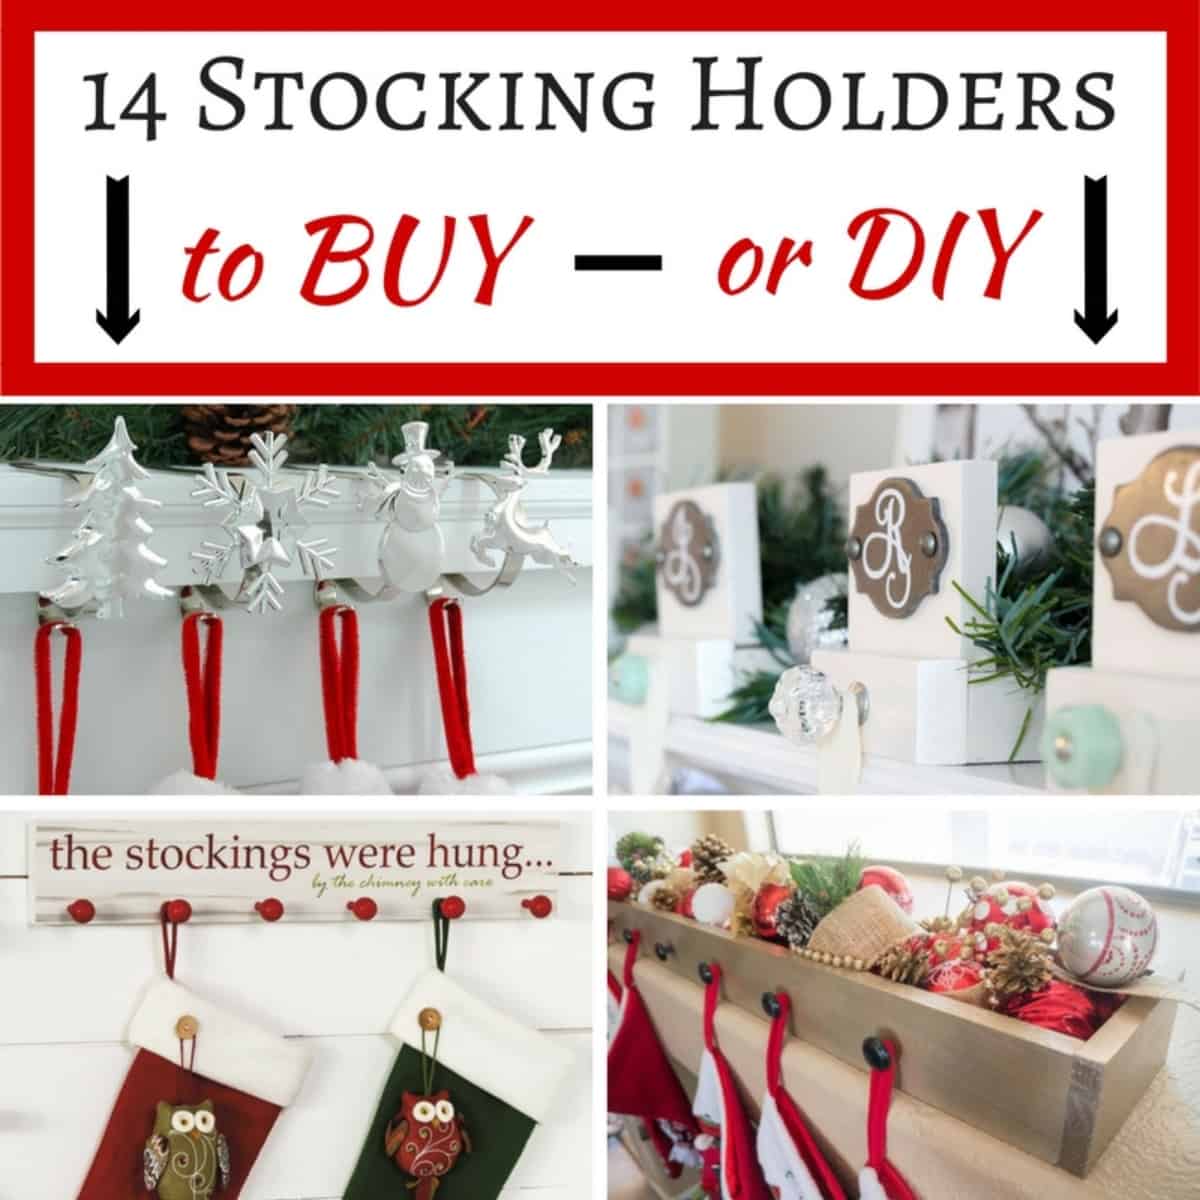 collage of stocking holders to buy or DIY